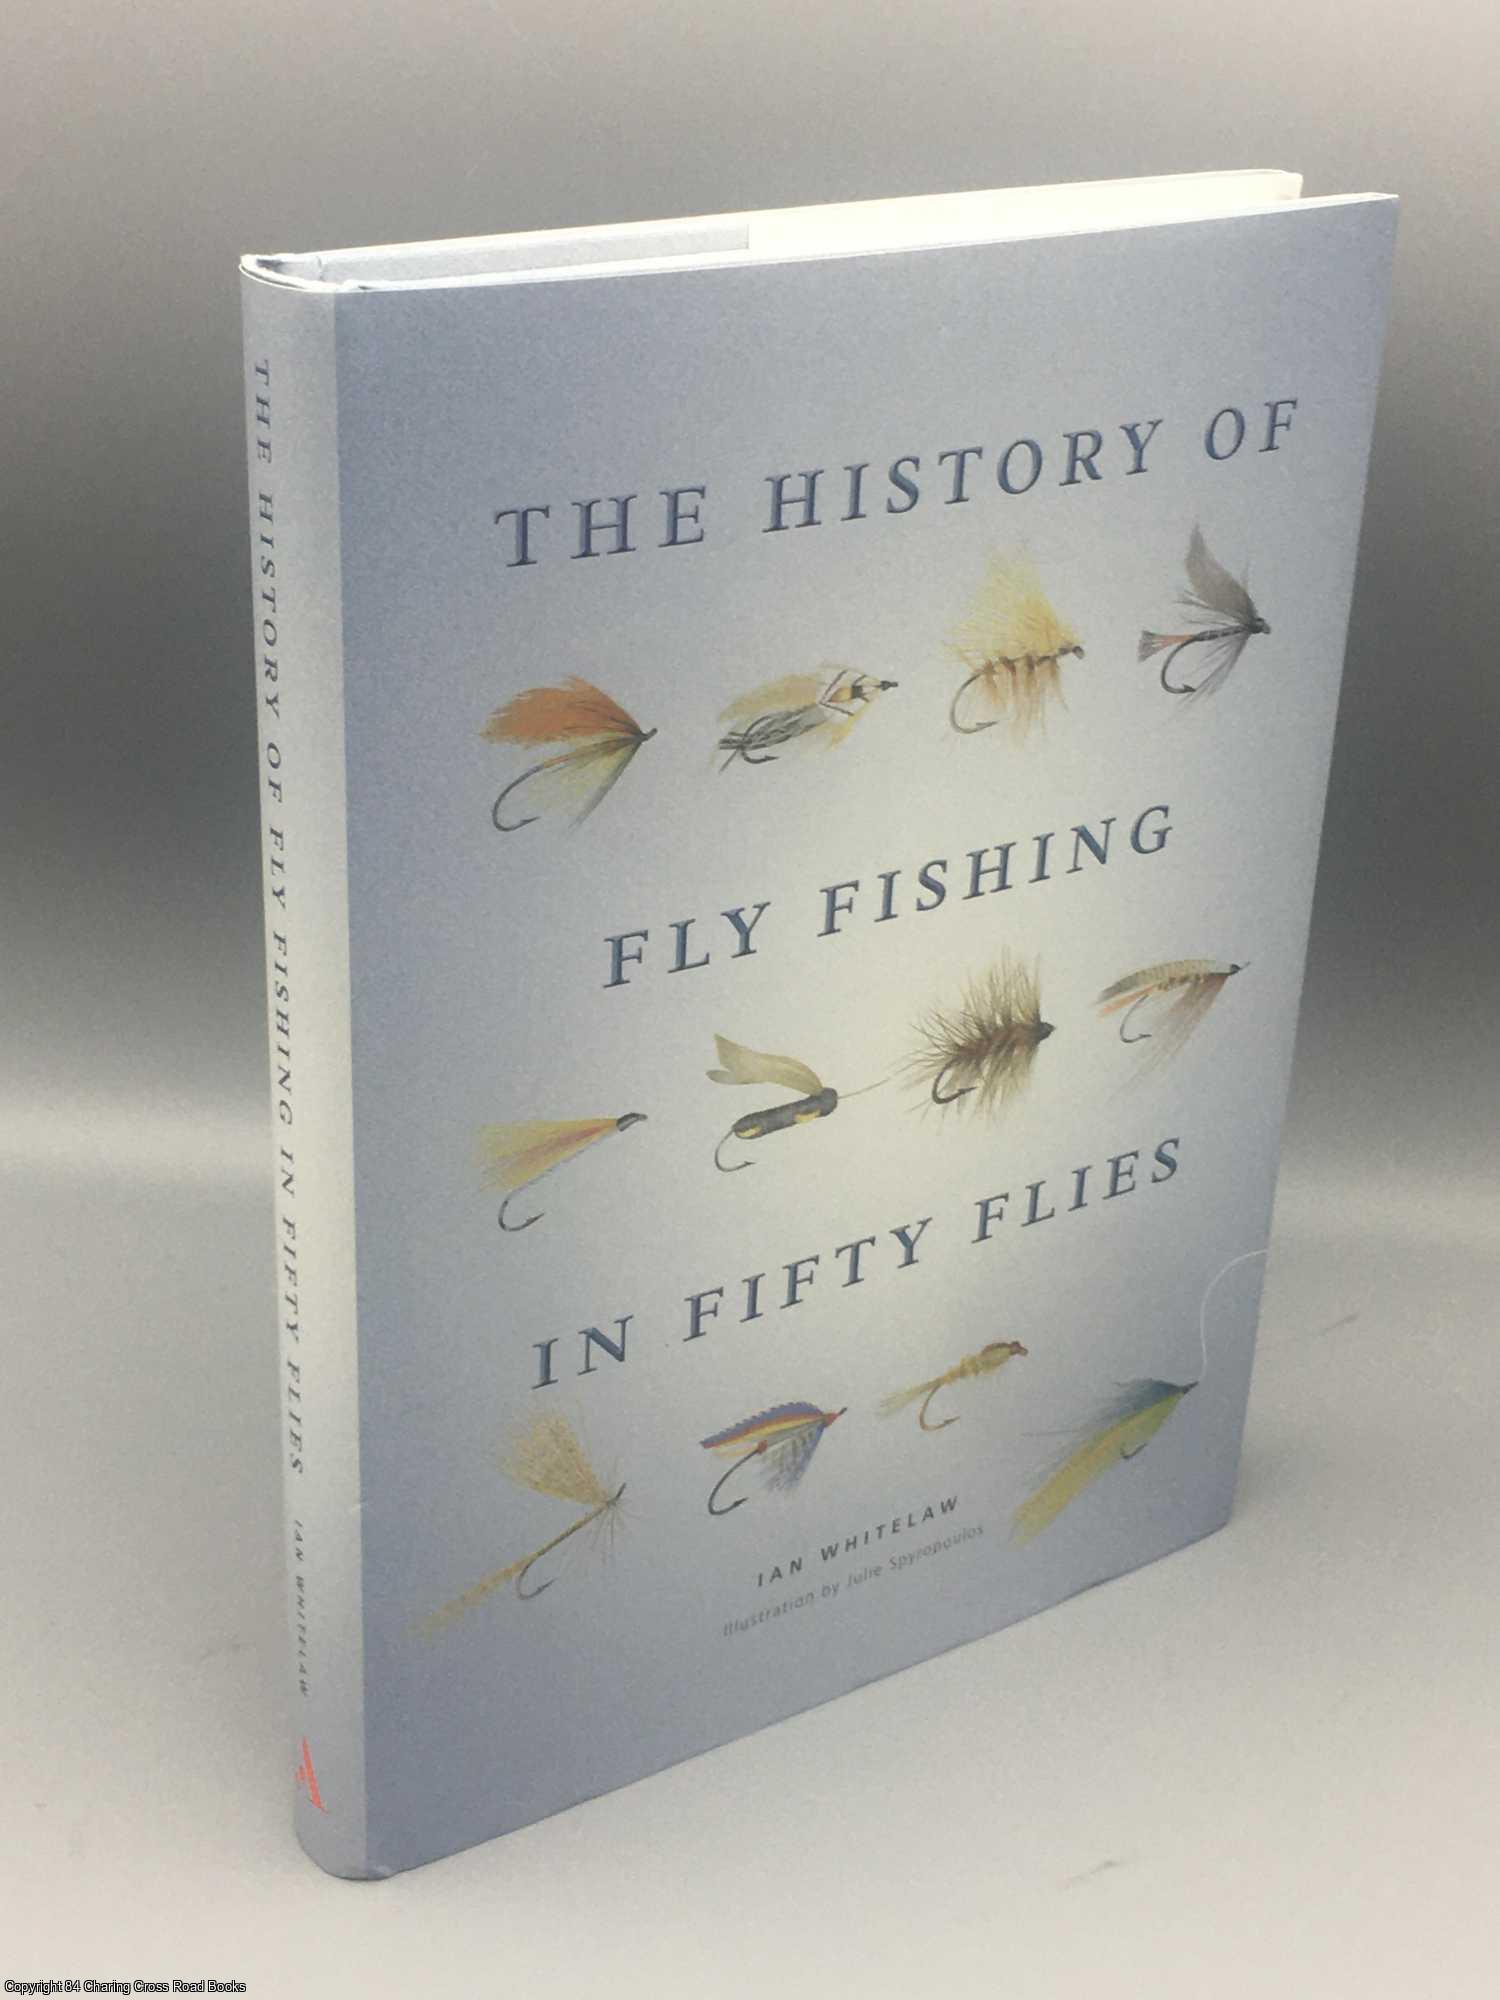 Whitelaw, Ian - The History of Fly Fishing in Fifty Flies